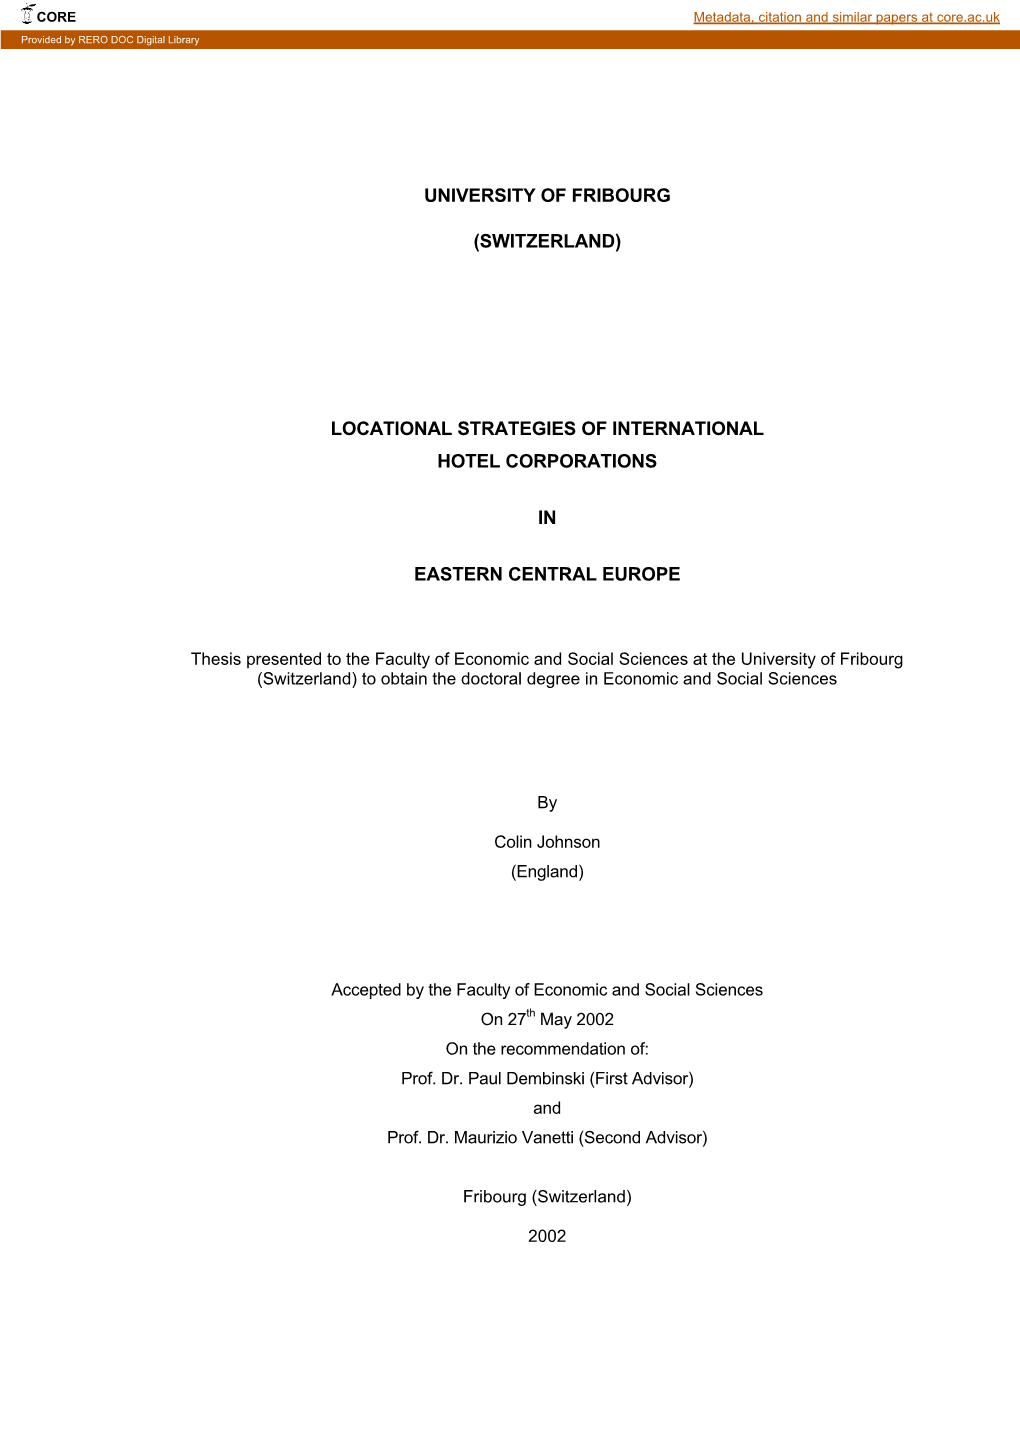 Locational Strategies of International Hotel Corporations in Eastern Central Europe ______